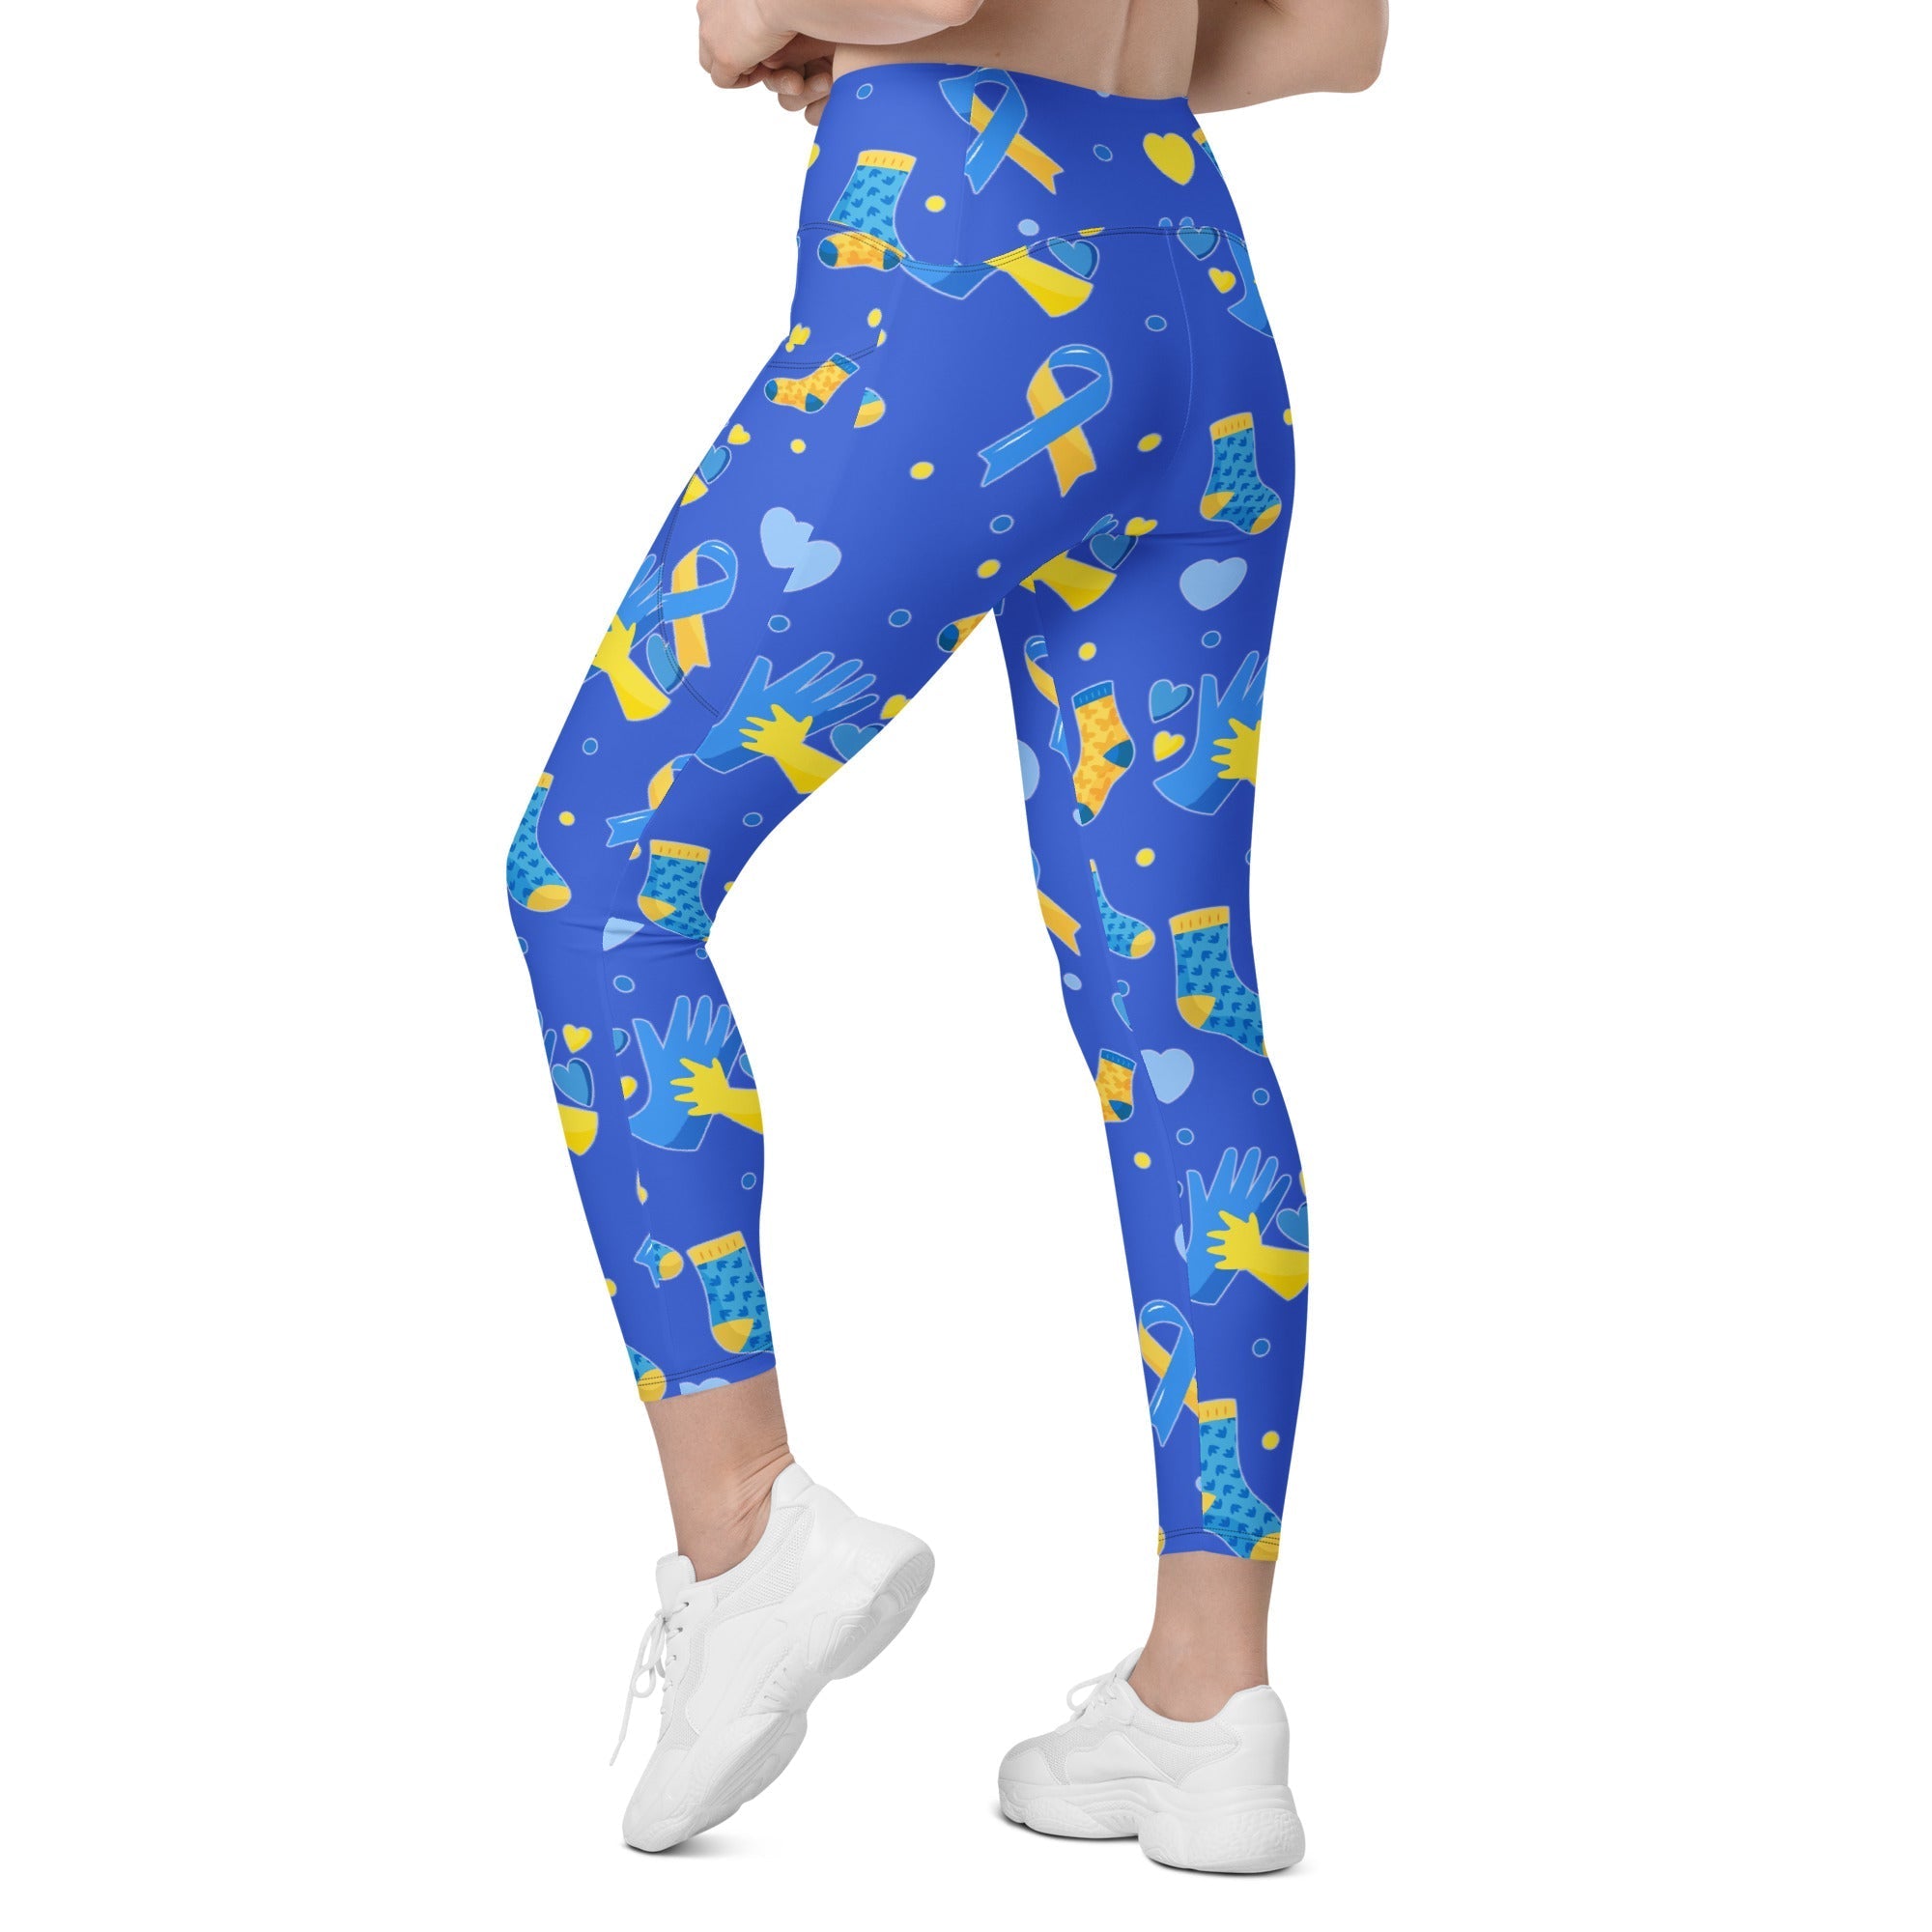 Down Syndrome Awareness Crossover Leggings With Pockets